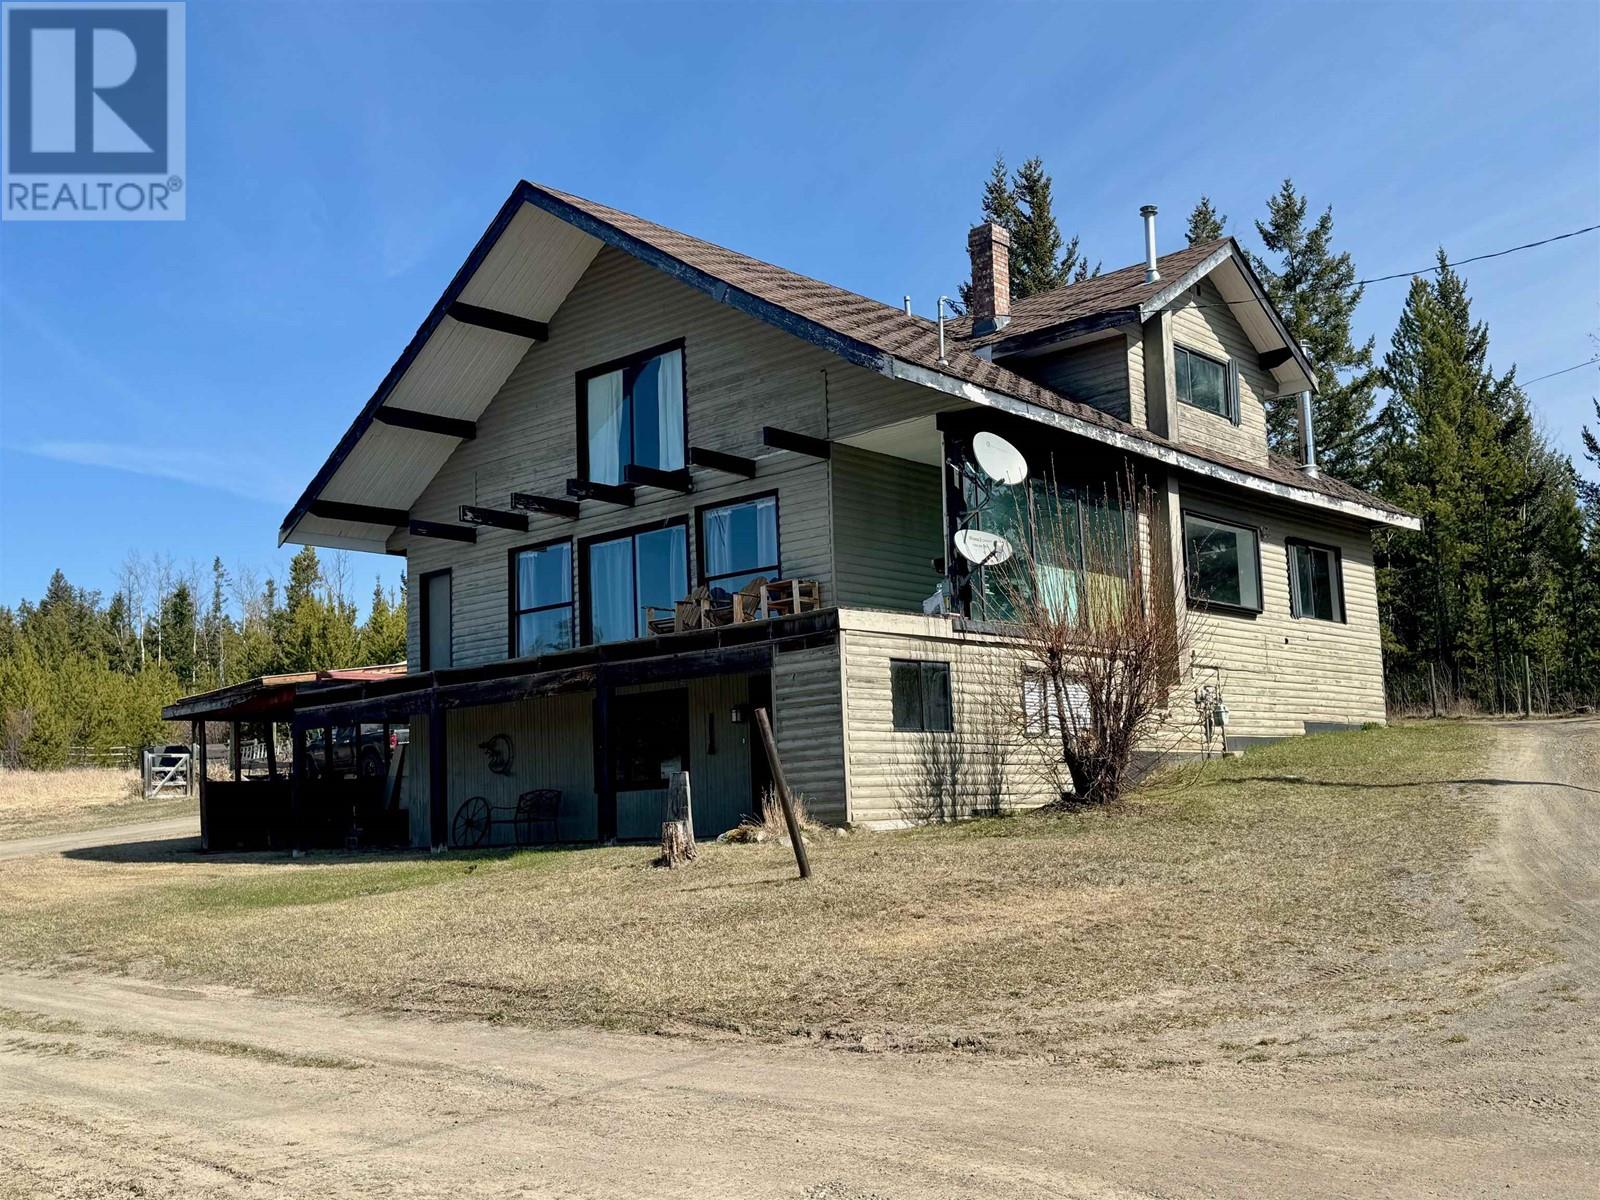 5881 LITTLE FORT 24 HIGHWAY, 100 mile house, British Columbia